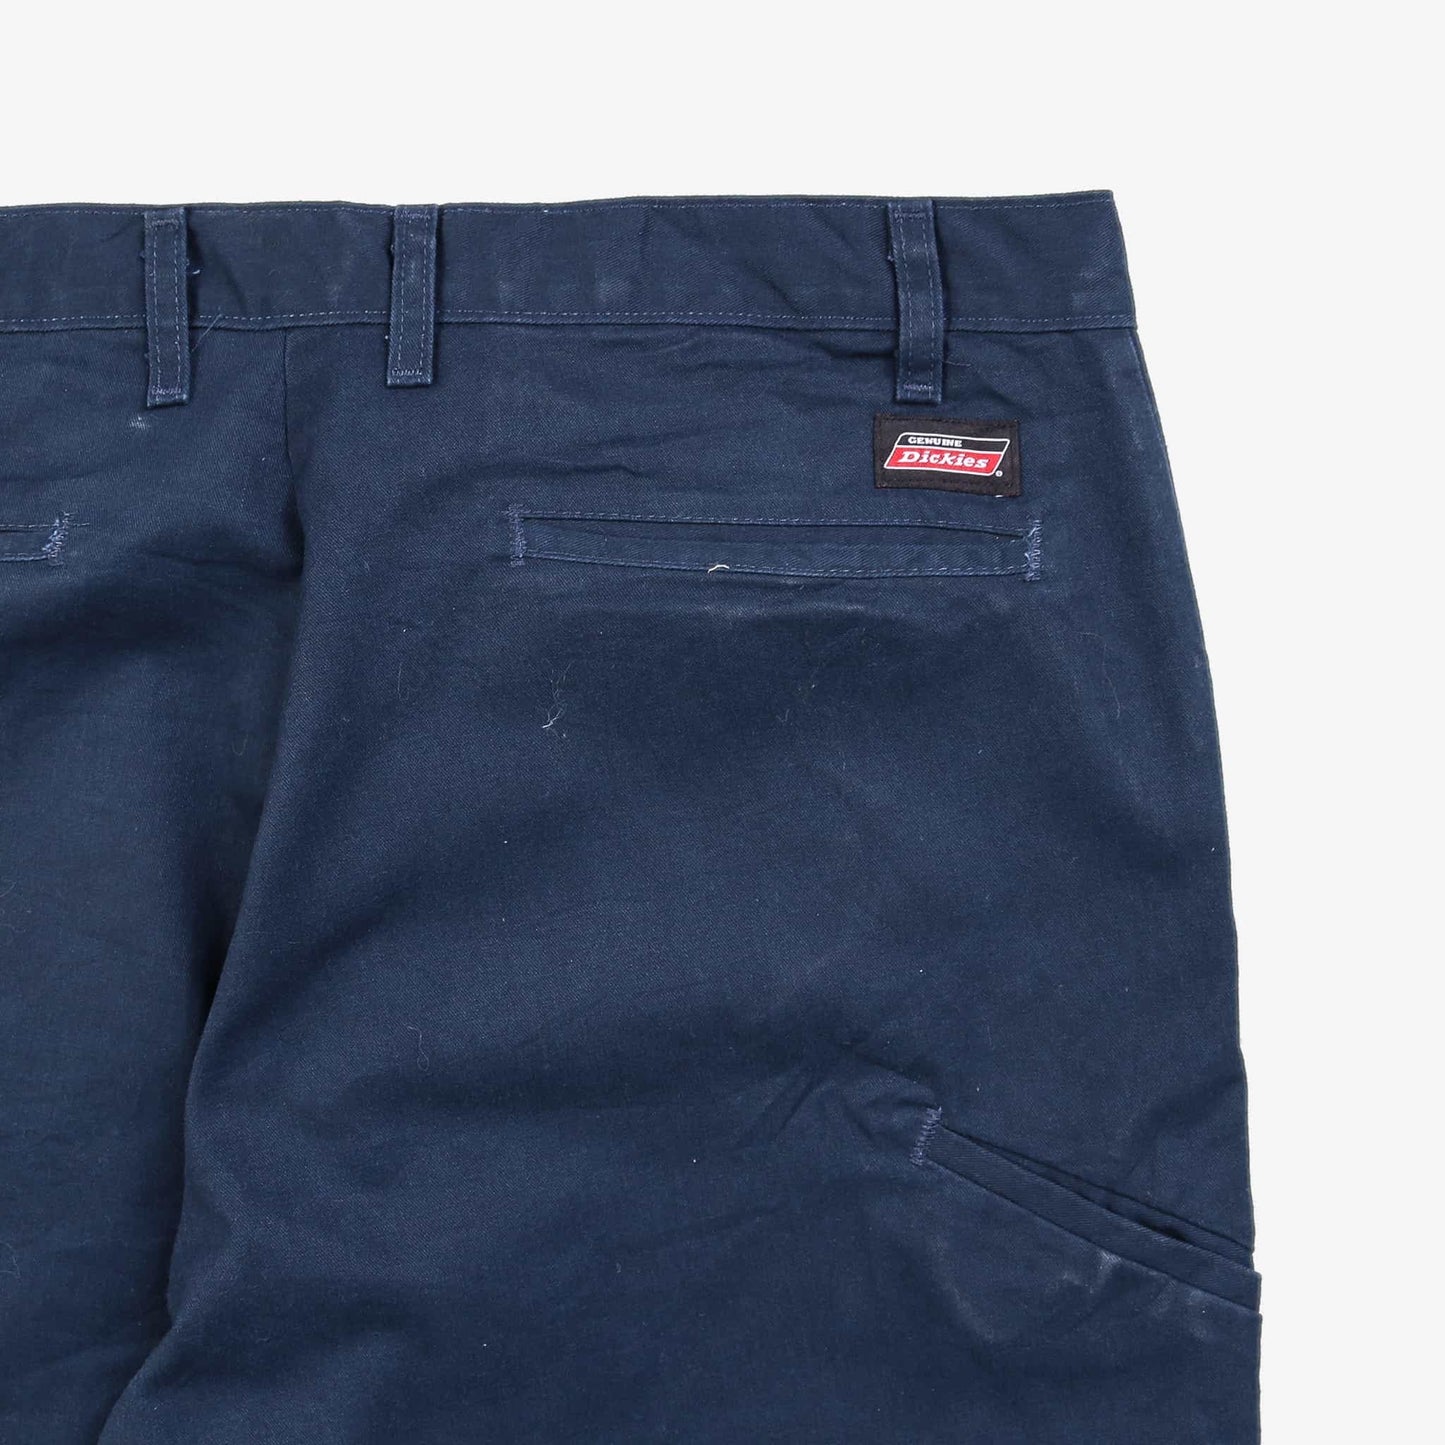 874 Work Trousers - Navy - 36/30 - American Madness